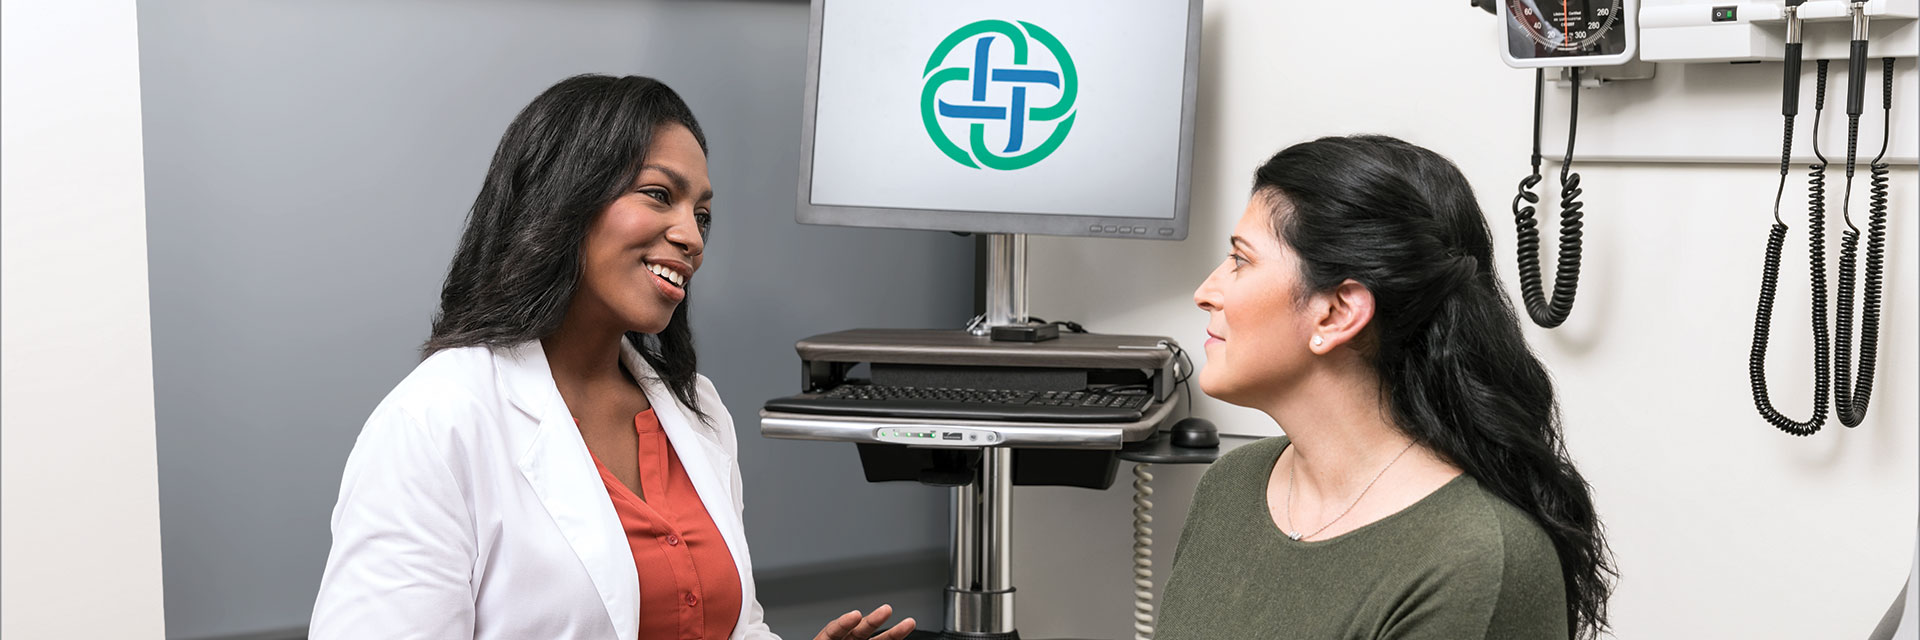 https://www.texashealth.org/thpg/-/media/Project/THR/shared/Header-Images/Header-Female-Doctor-Talking-with-Female-Patient.jpg?h=640&iar=0&w=1920&hash=59AADE7FB7385F74F50121B85C1AD86F